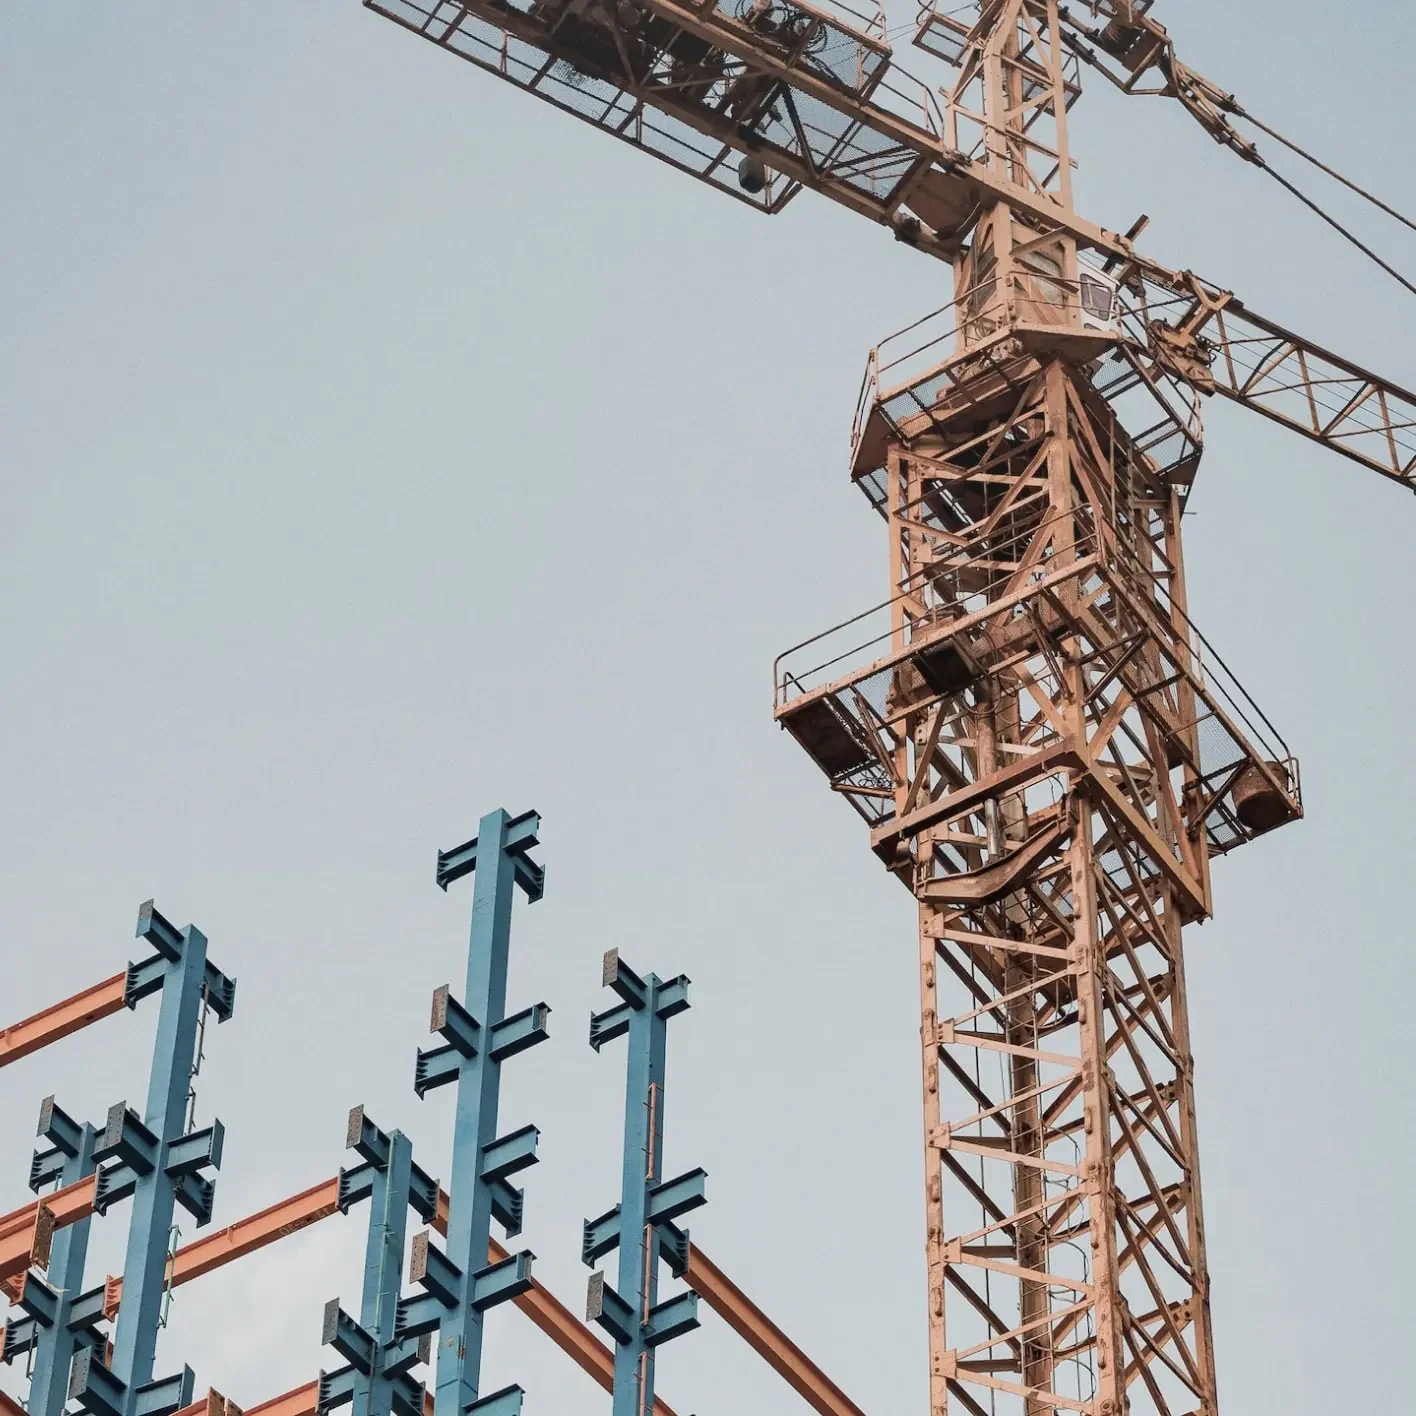 A crane sits on top of a steel structure